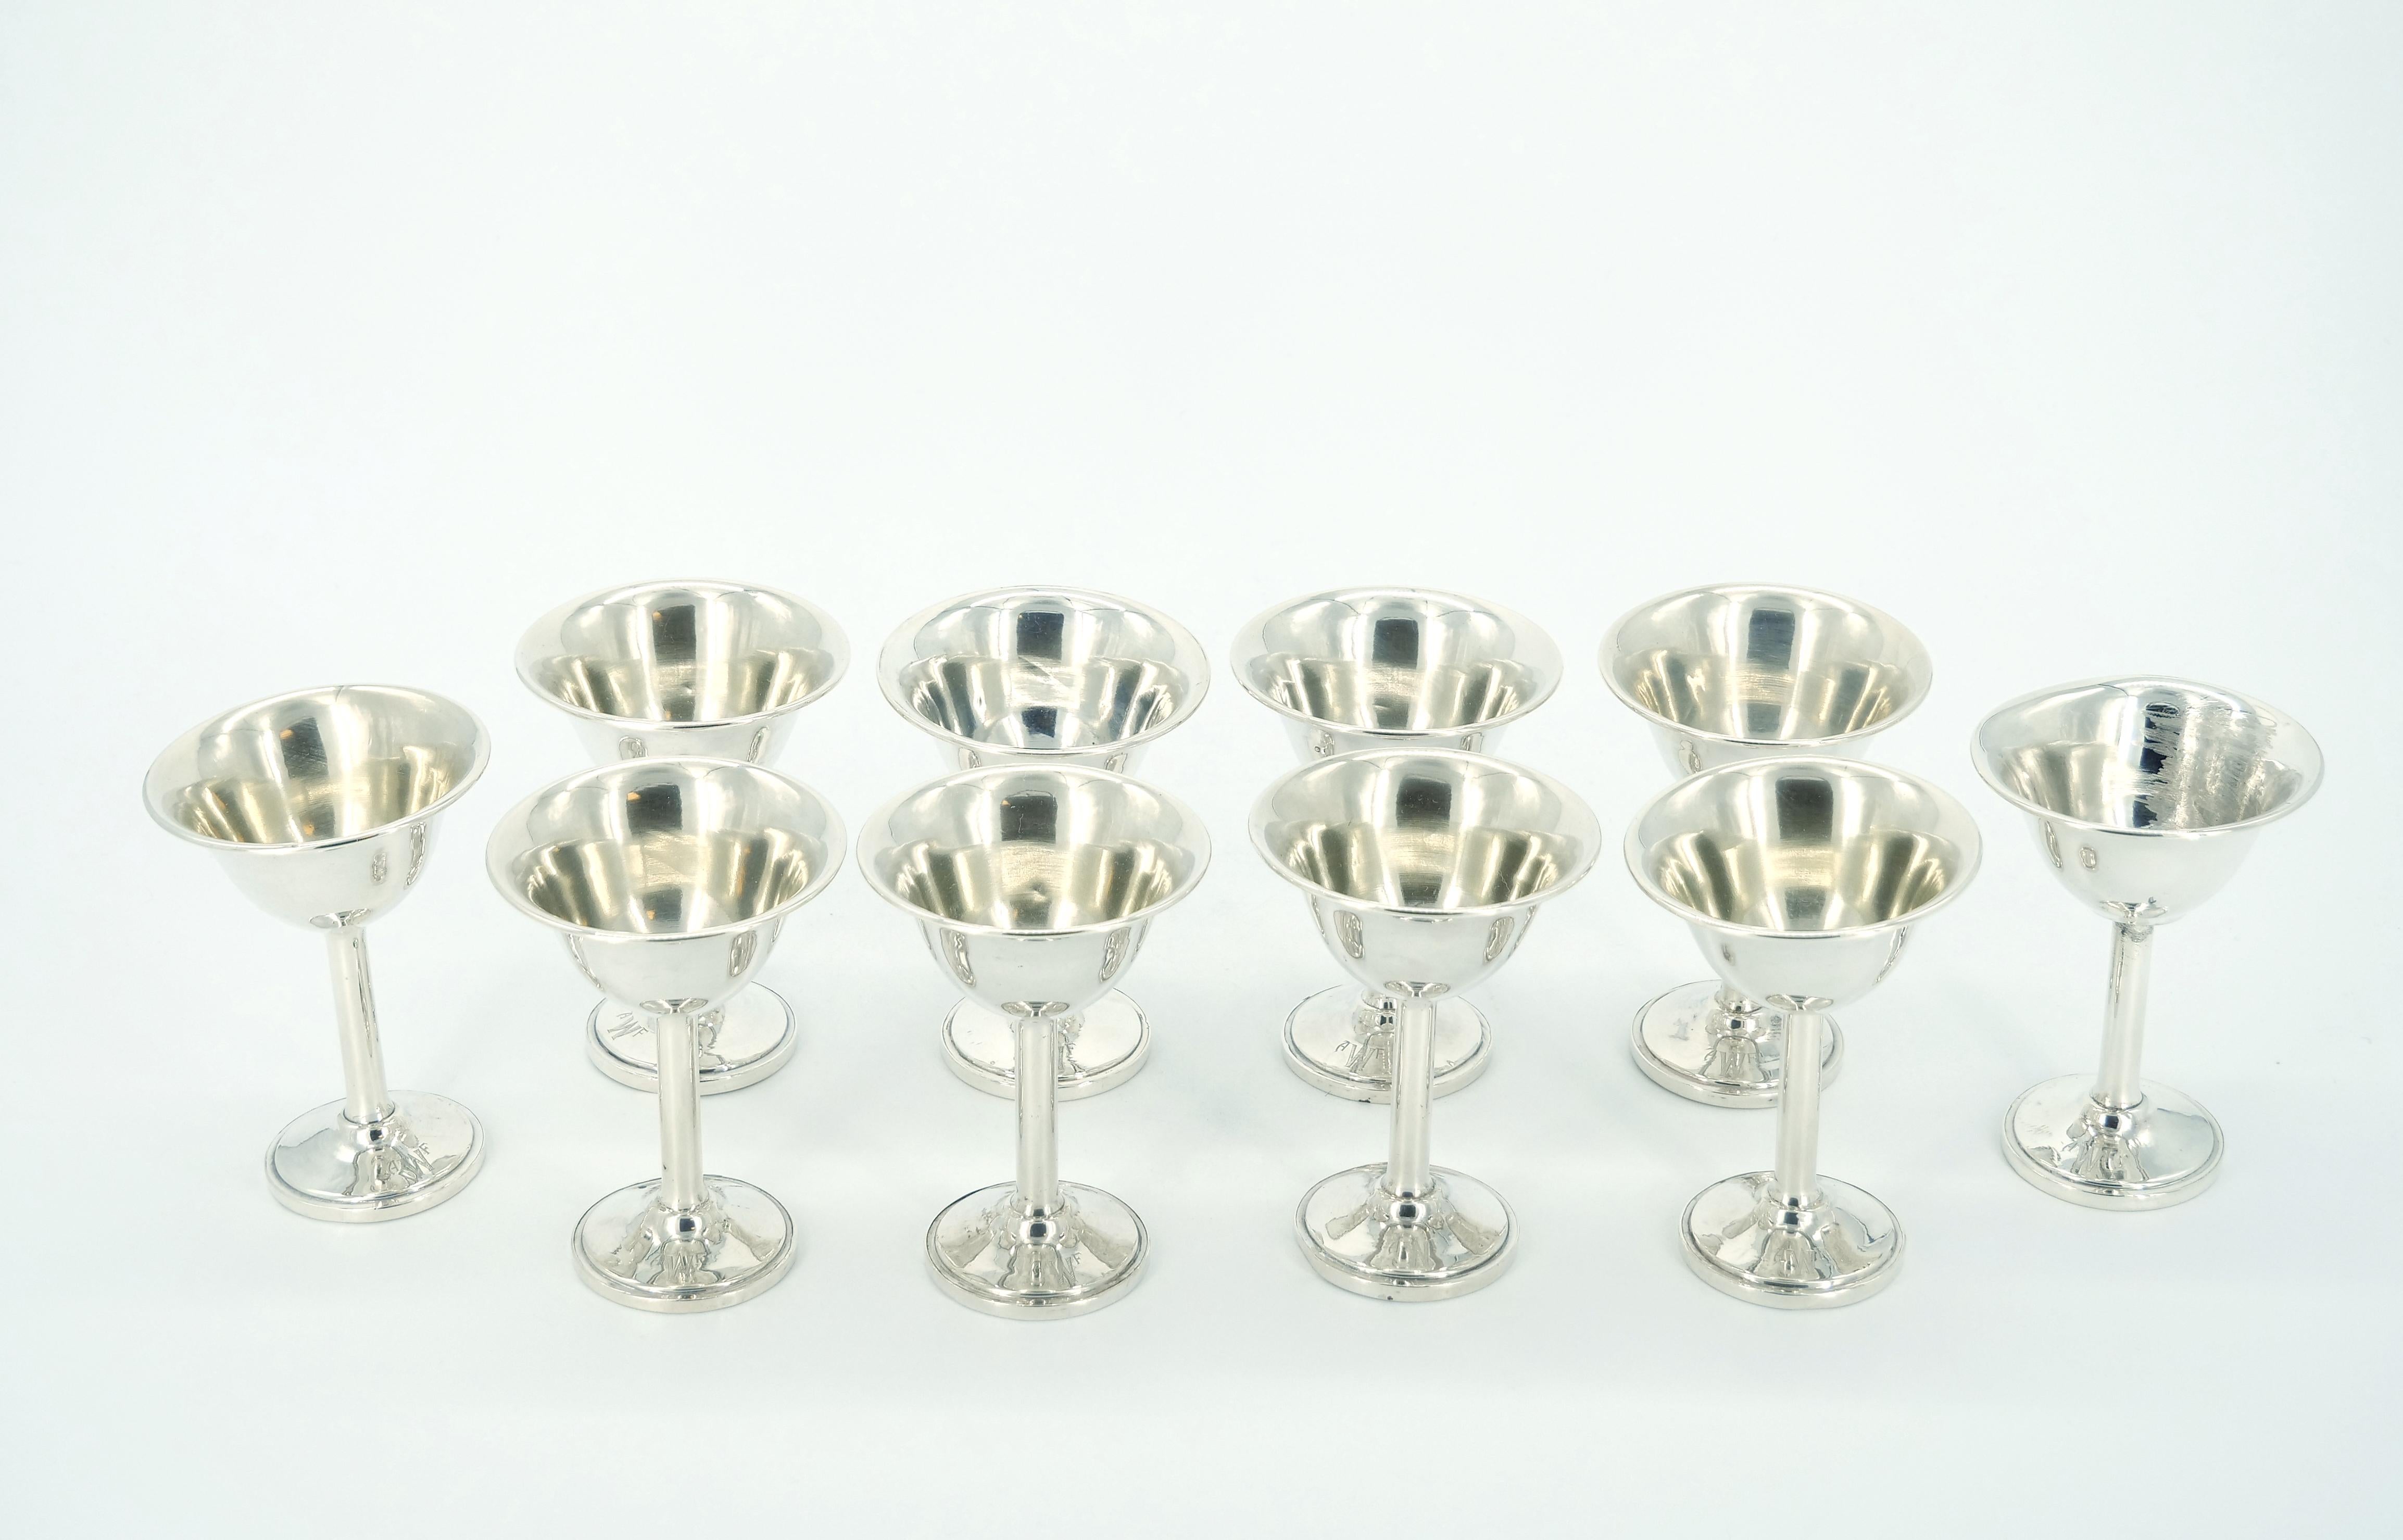 Early 20th Century American Sterling Silver Tableware Cordial's Service / Ten For Sale 1